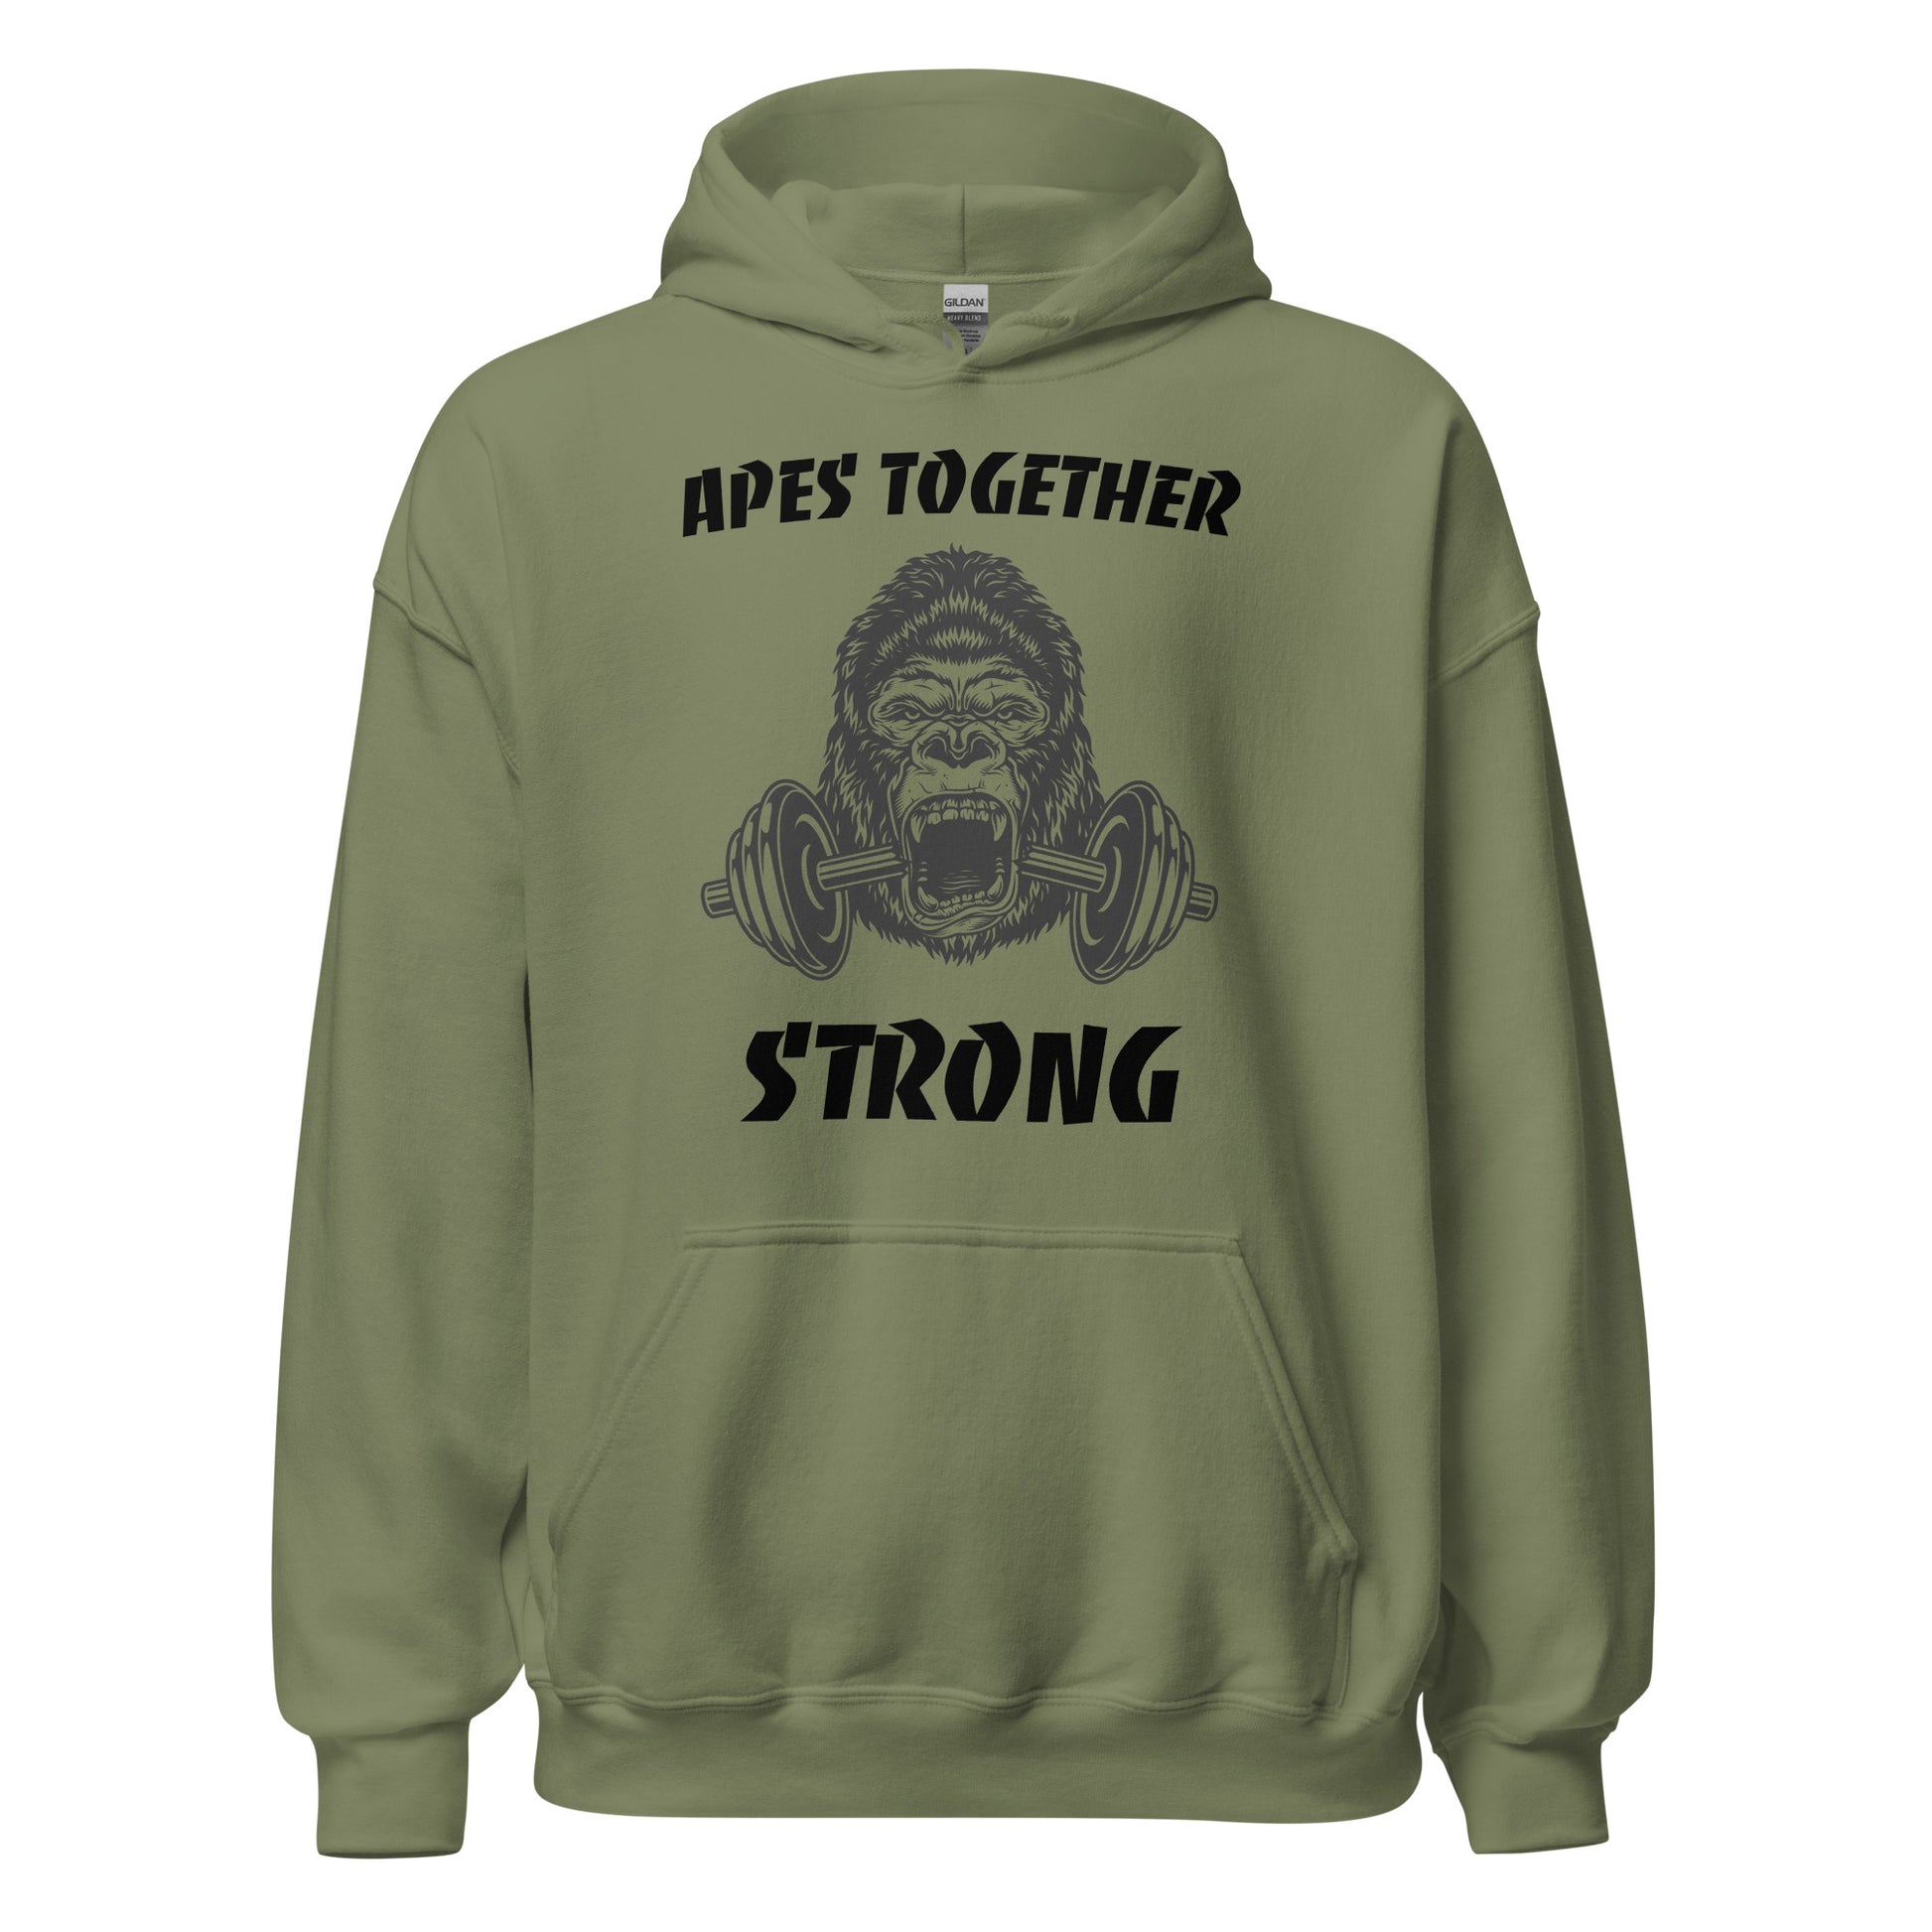 Apes Together Strong Hoodie in Military Green